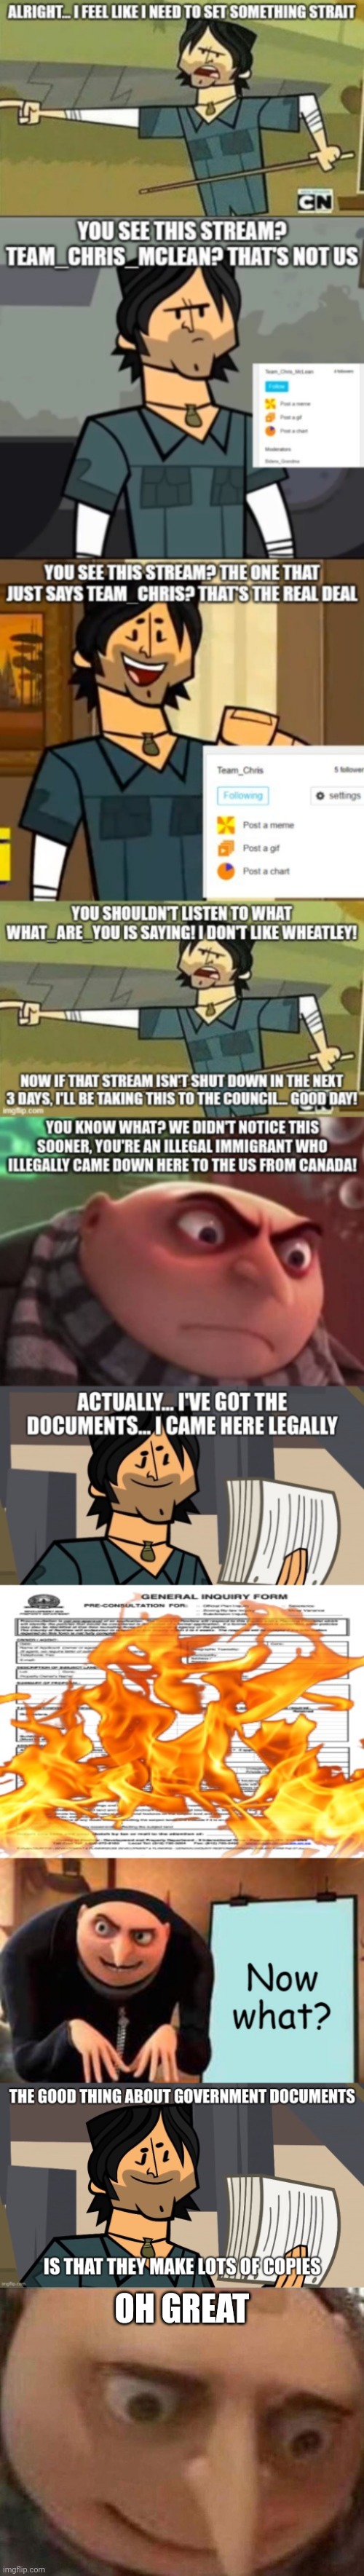 OH GREAT | image tagged in gru meme | made w/ Imgflip meme maker